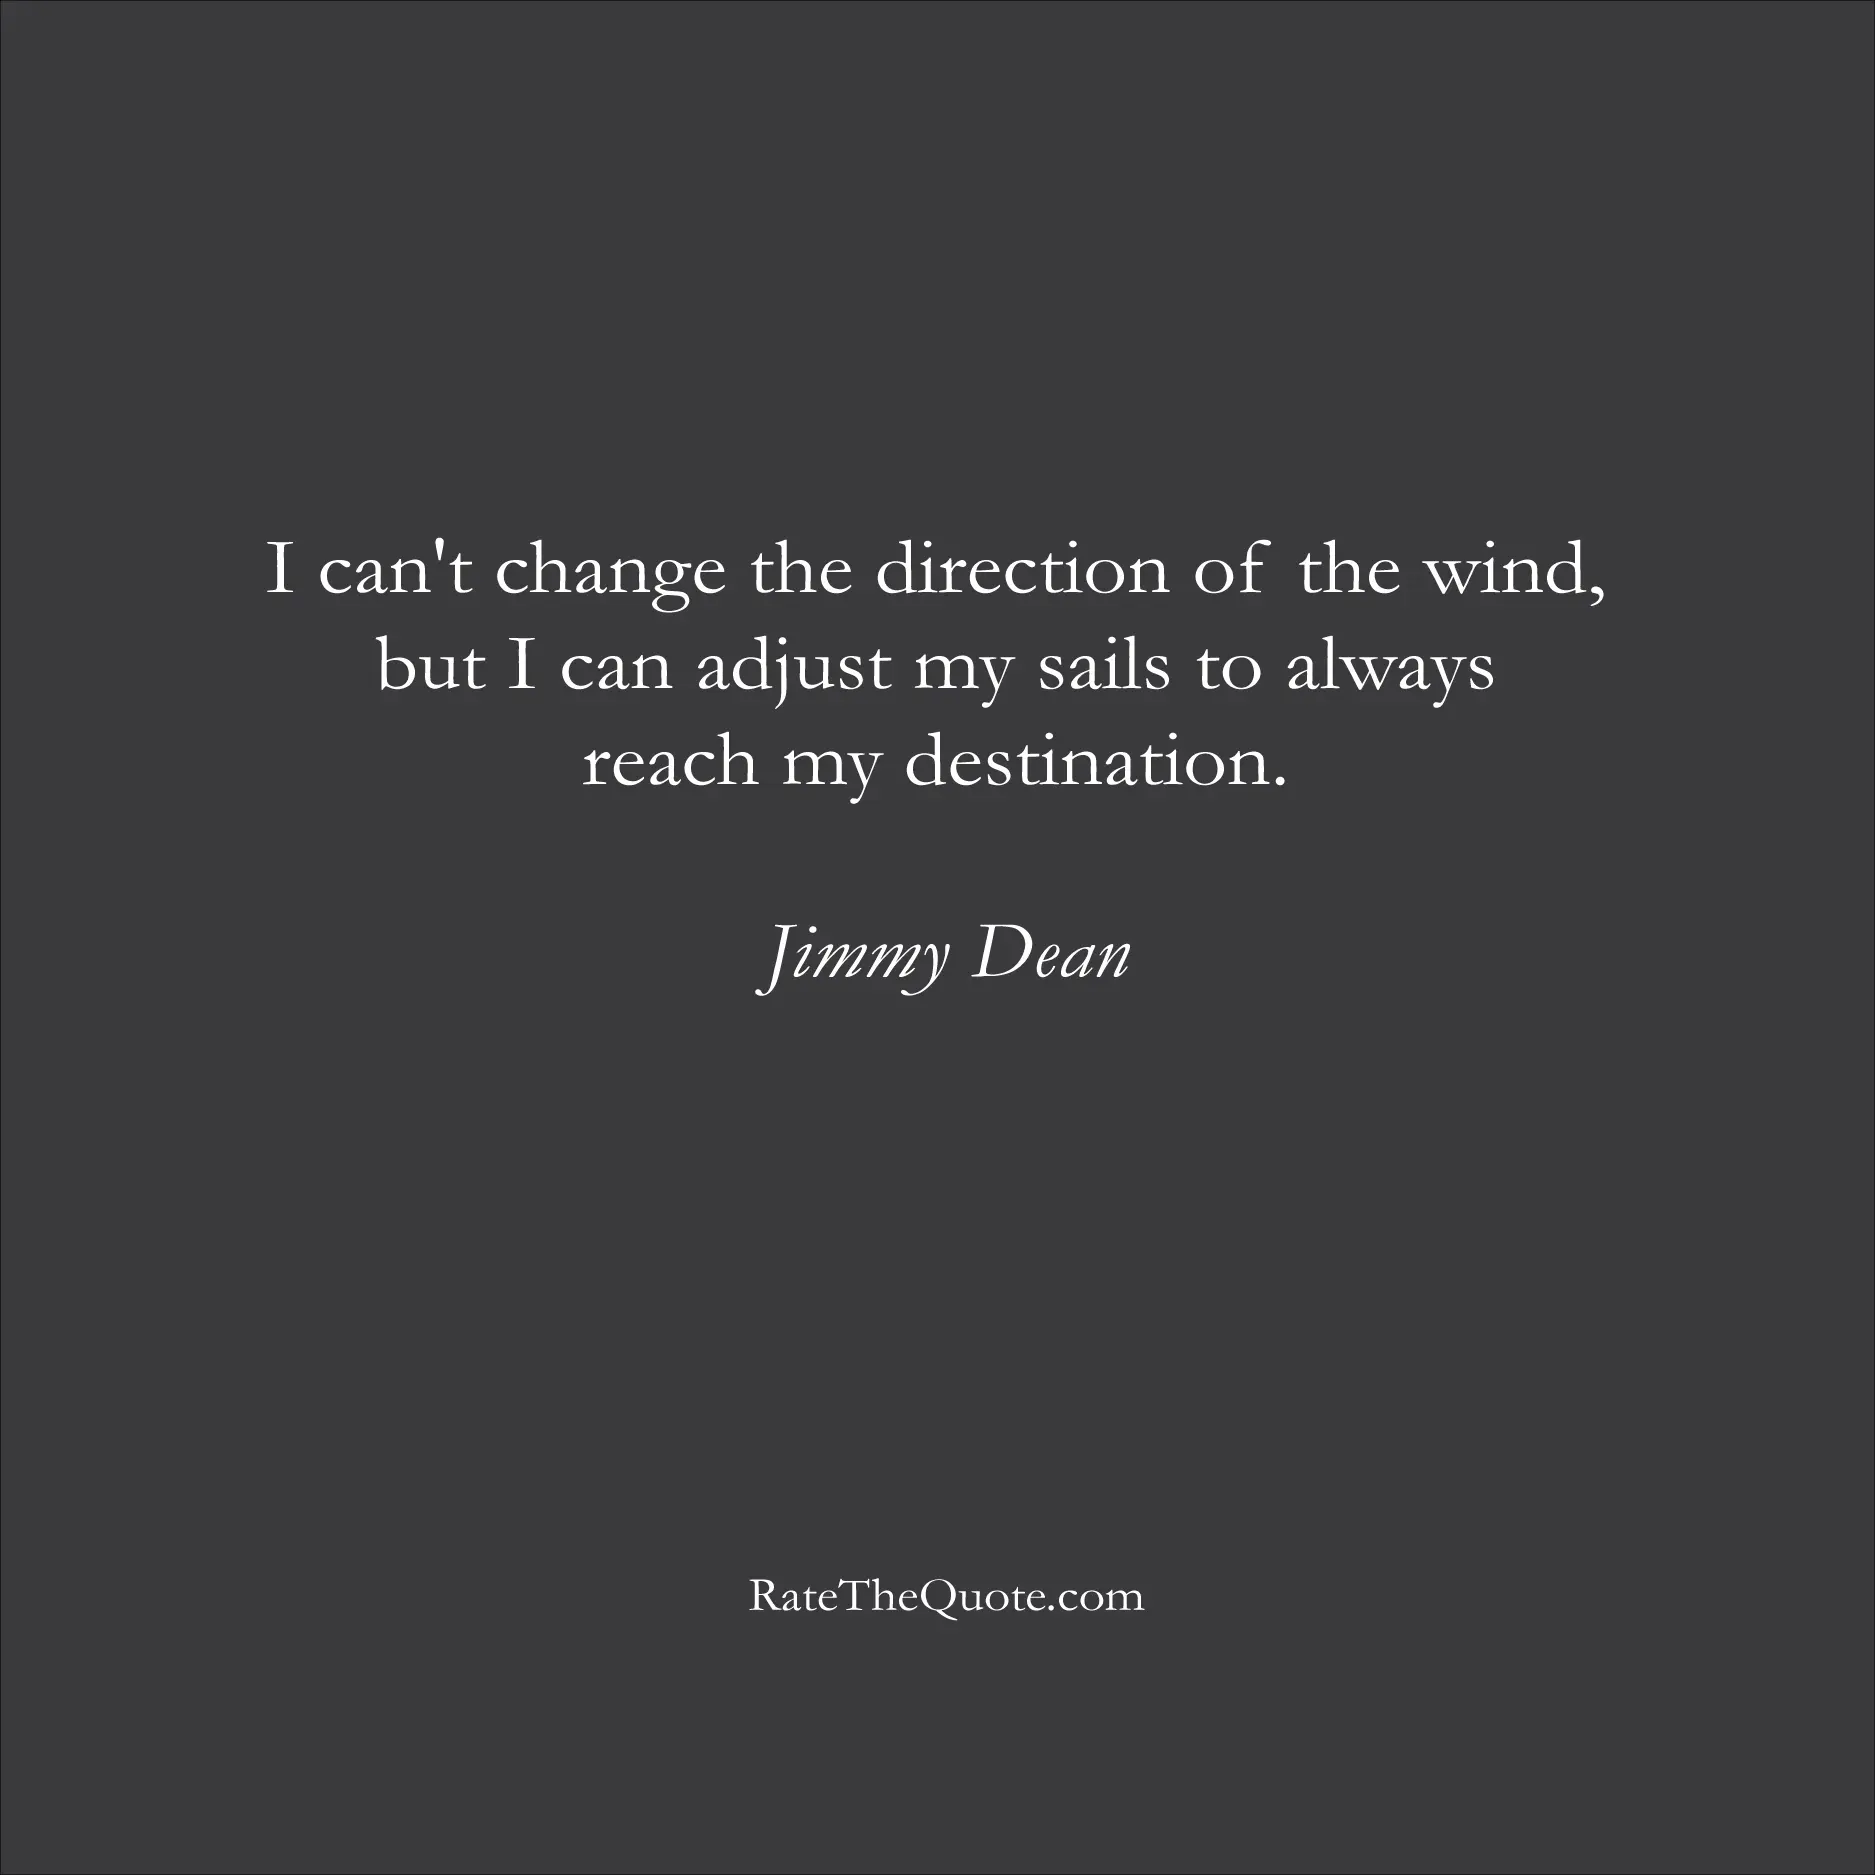 Inspirational Quotes I can't change the direction of the wind, but I can adjust my sails to always reach my destination. Jimmy Dean